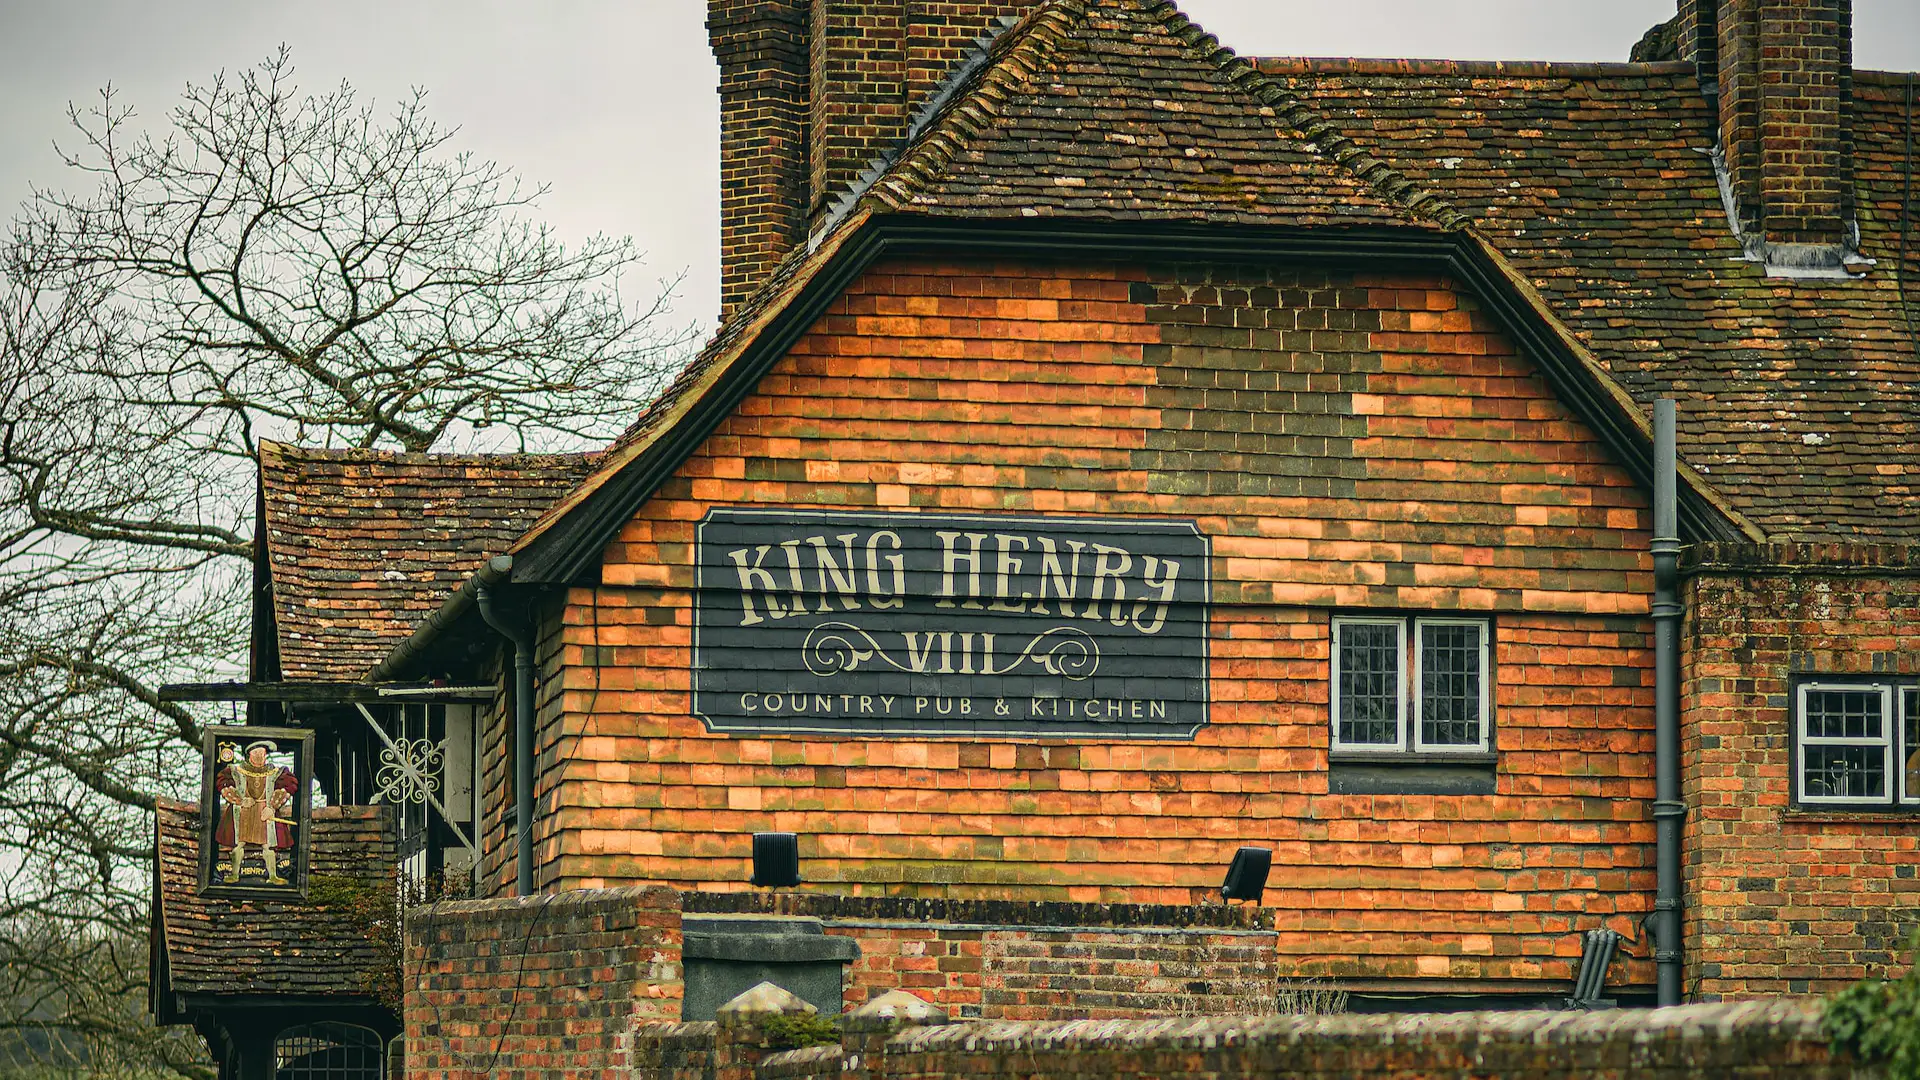 A quaint, brick-built country pub named "king henry viii" features a black sign with white lettering, set against a backdrop of lush trees. two people stand on a balcony adorned with flowers.